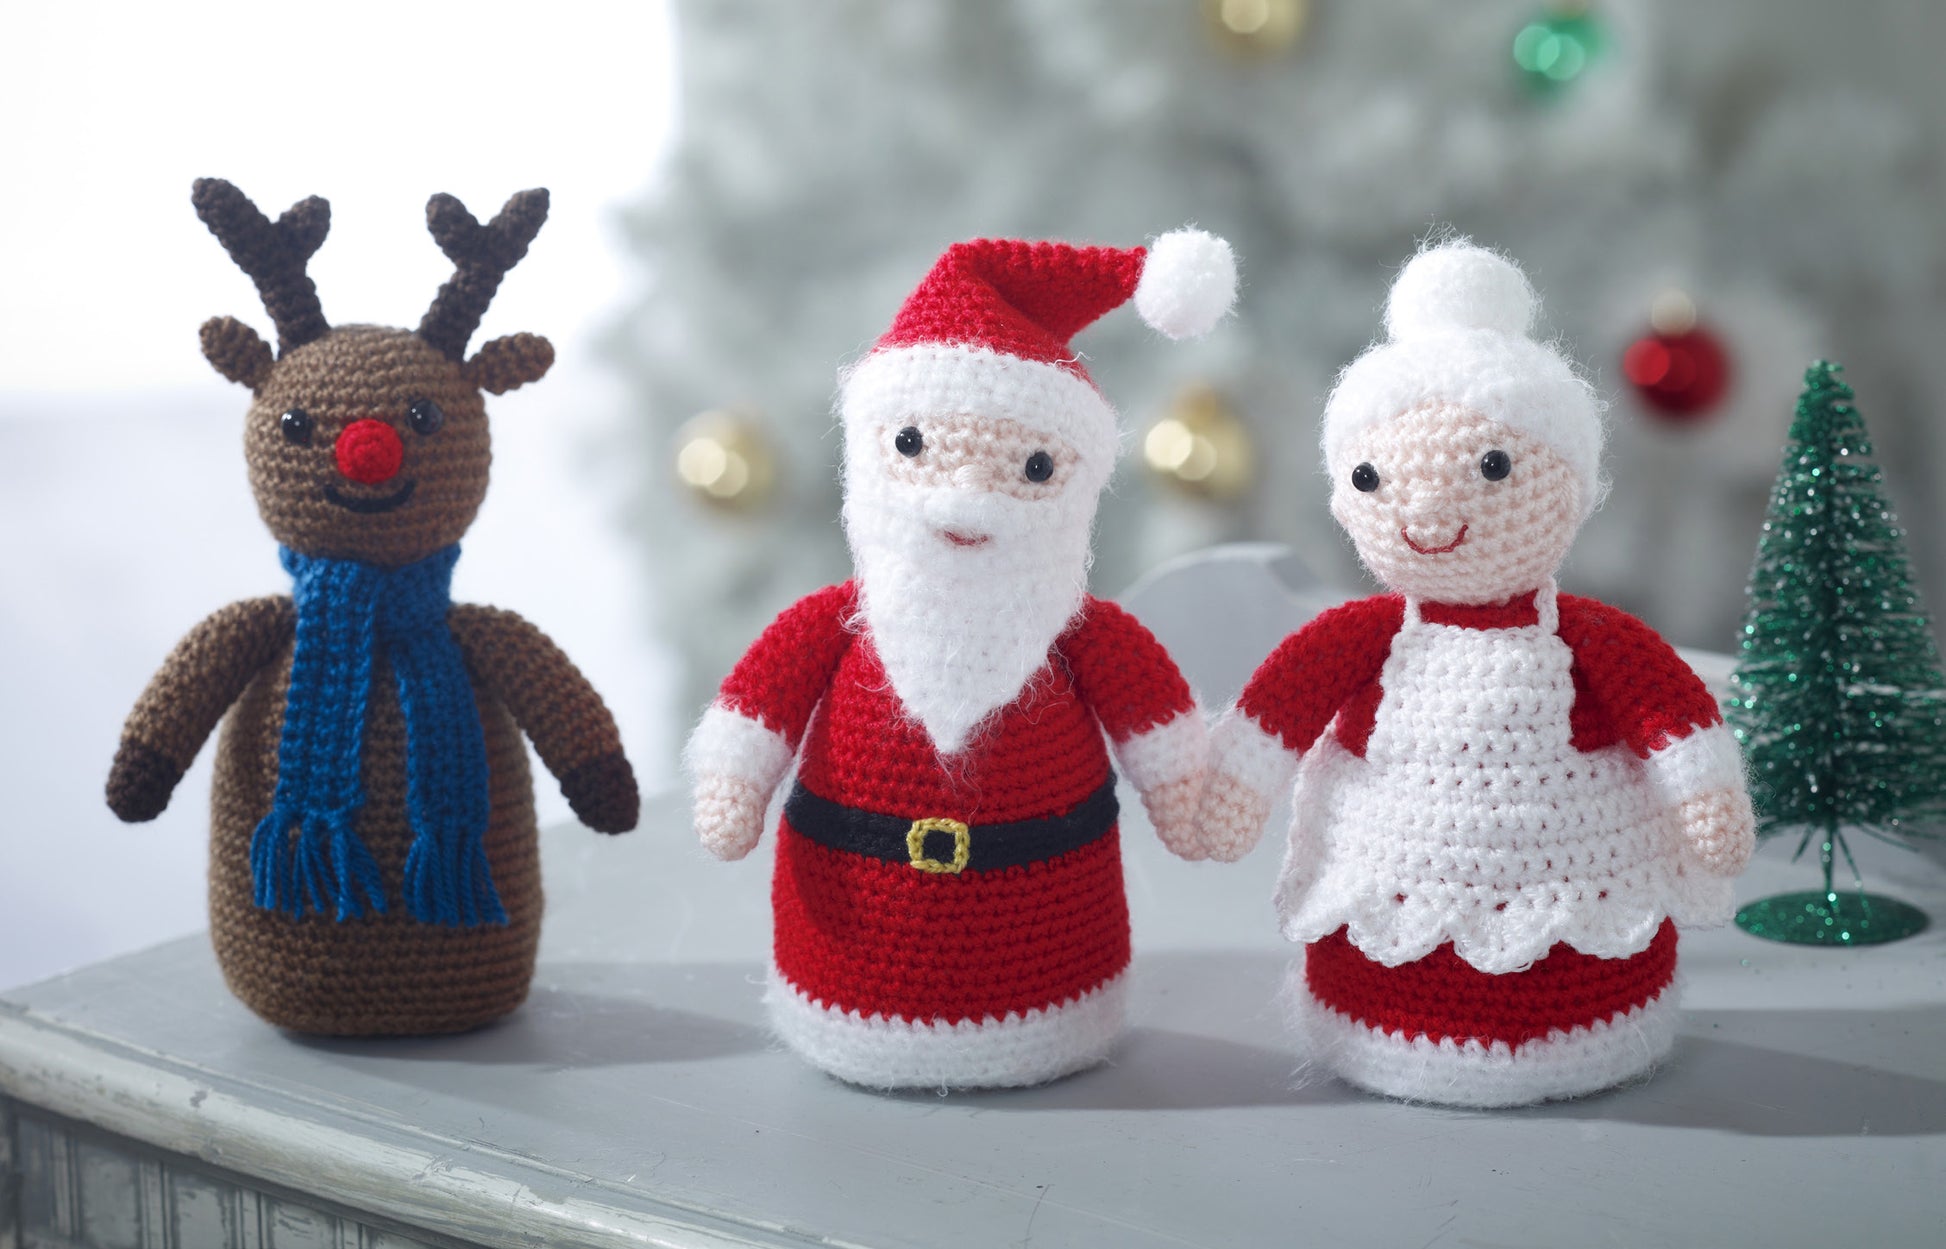 Adorable little decorative characters of Santa, Mrs Claus and Rudolph with a blue scarf. Each figure is approximately 18cm tall.